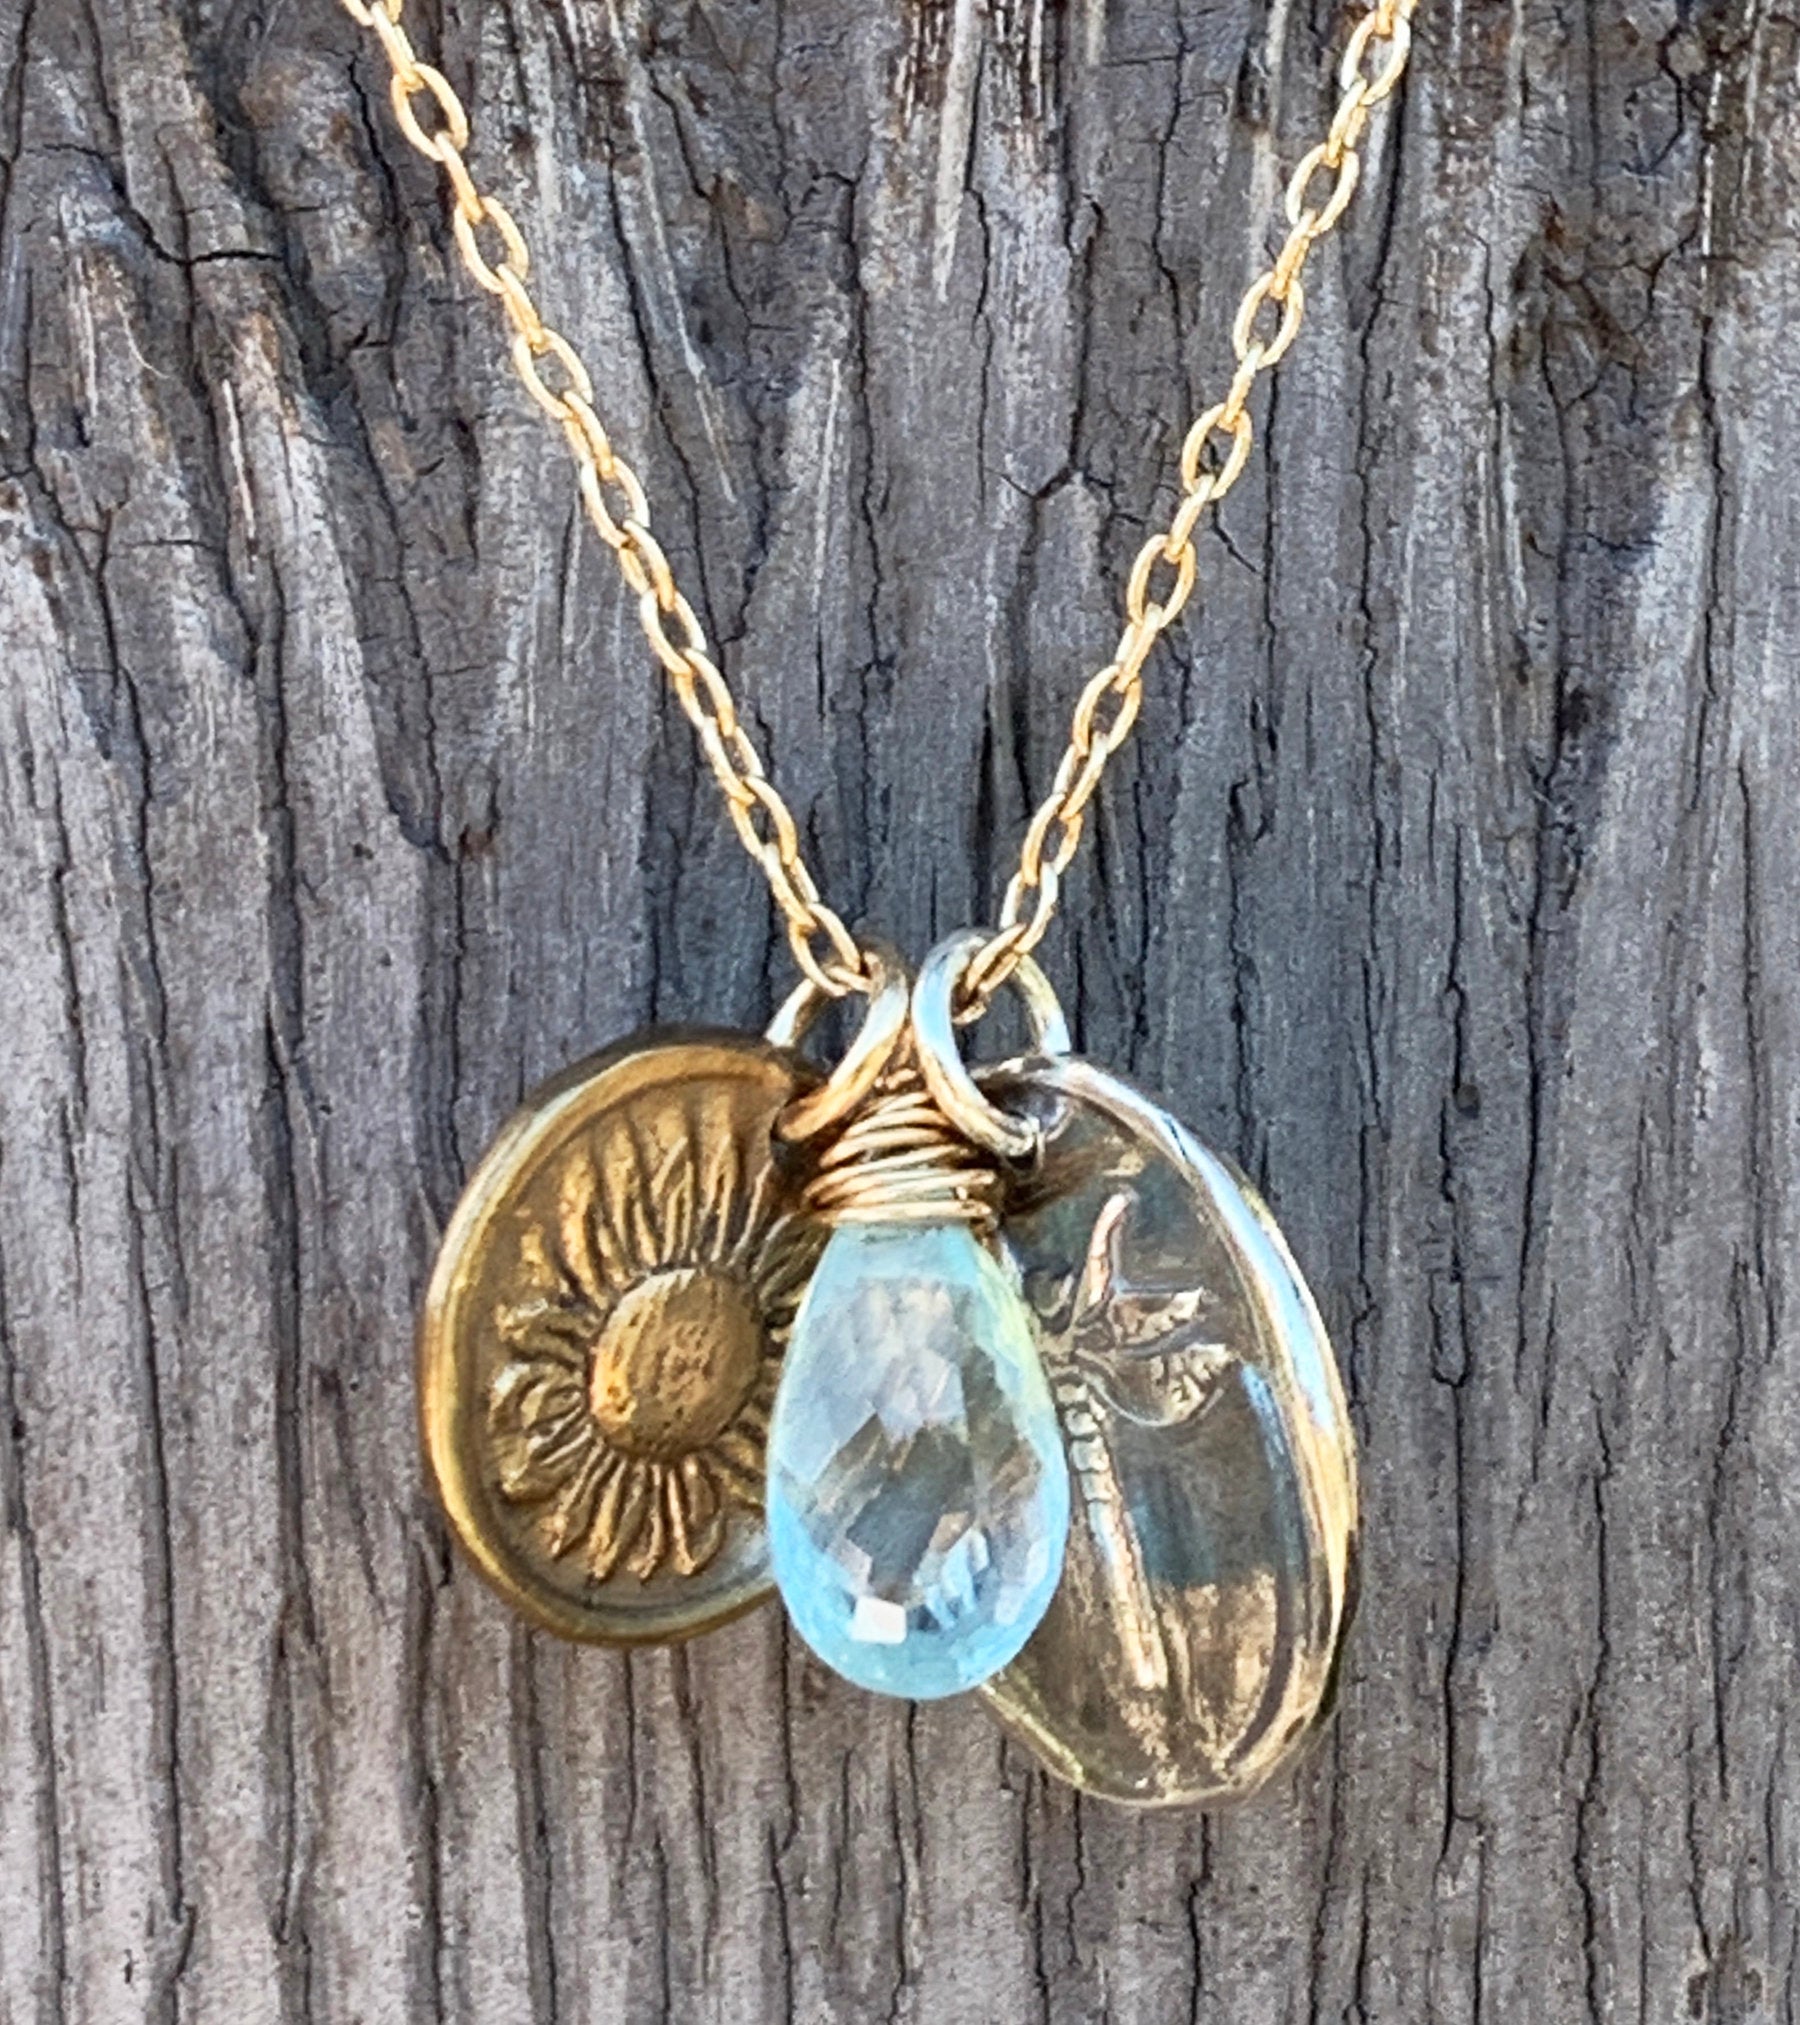 Handmade 14K Gold Fill Necklace with Sterling Silver Dragonfly & Bronze Sunflower Charms with Aquamarine Drop